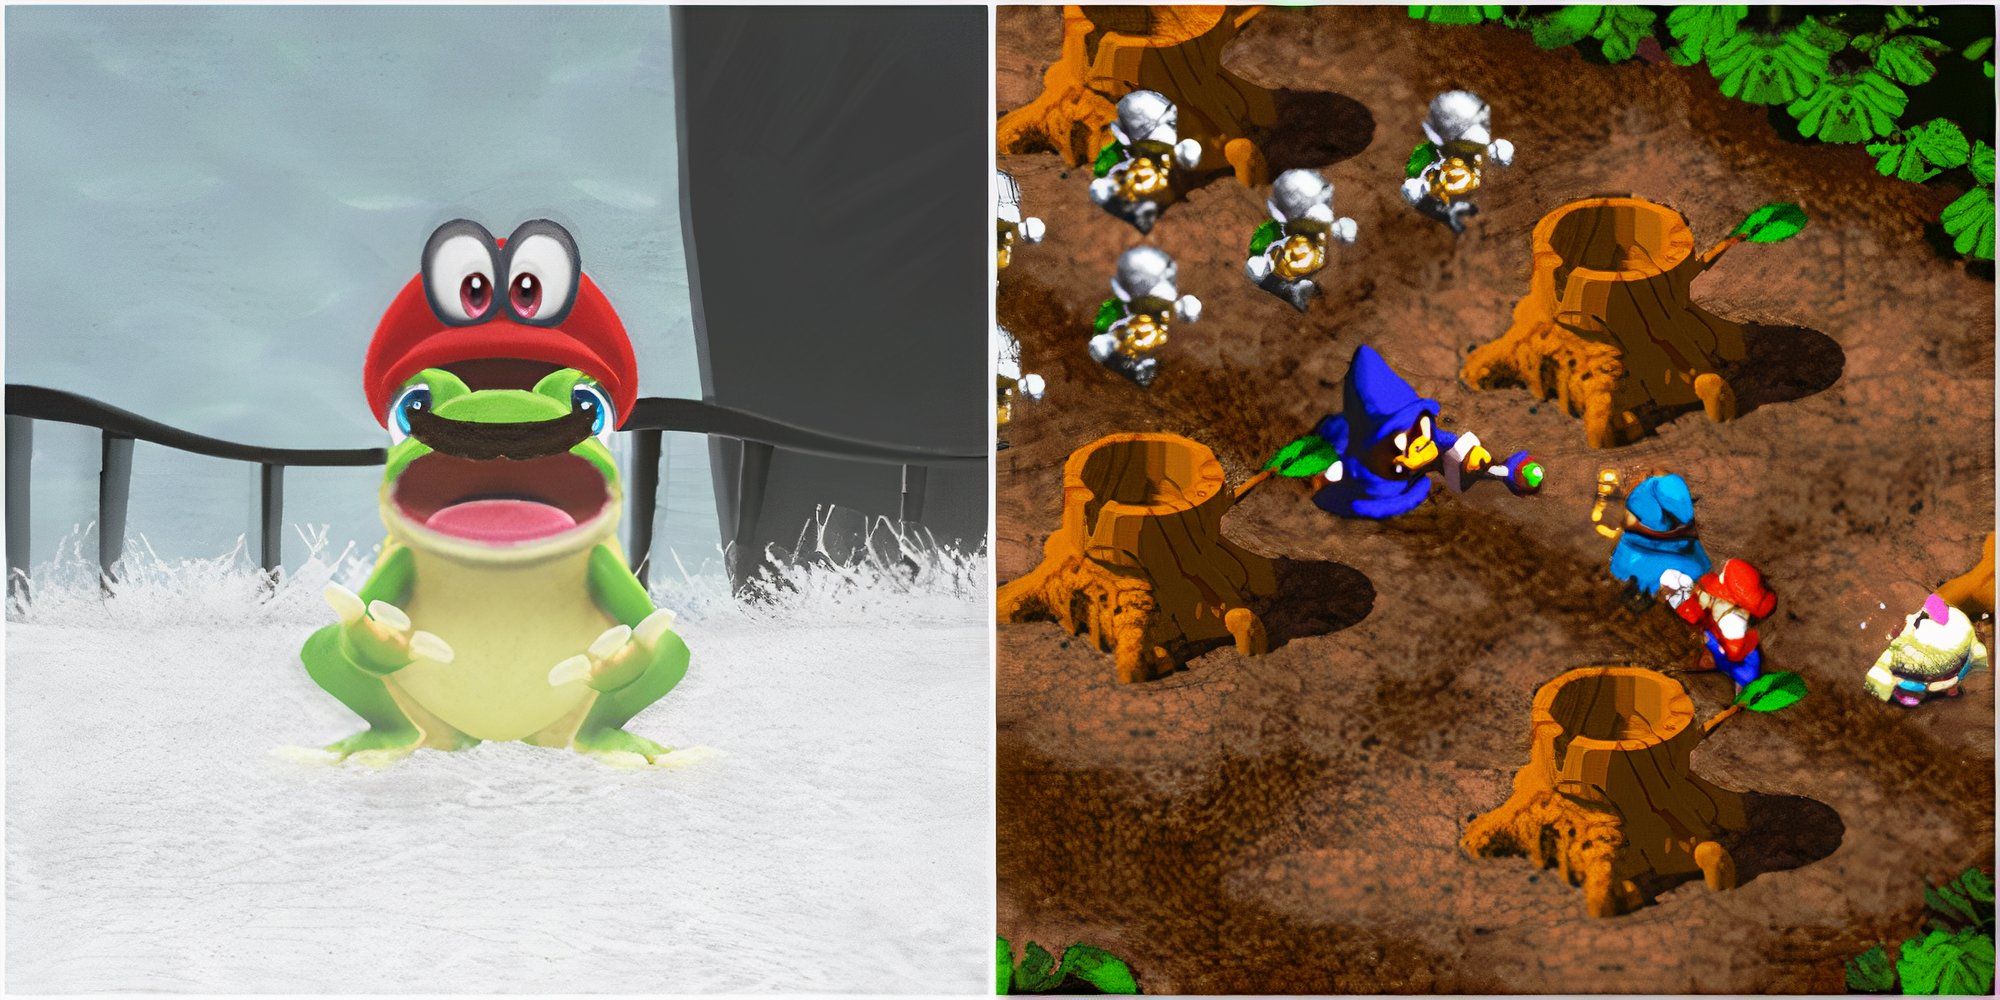 Mario as a frog in Super Mario Odyssey and A scene featuring characters in Super Mario RPG Legend of the Seven Stars